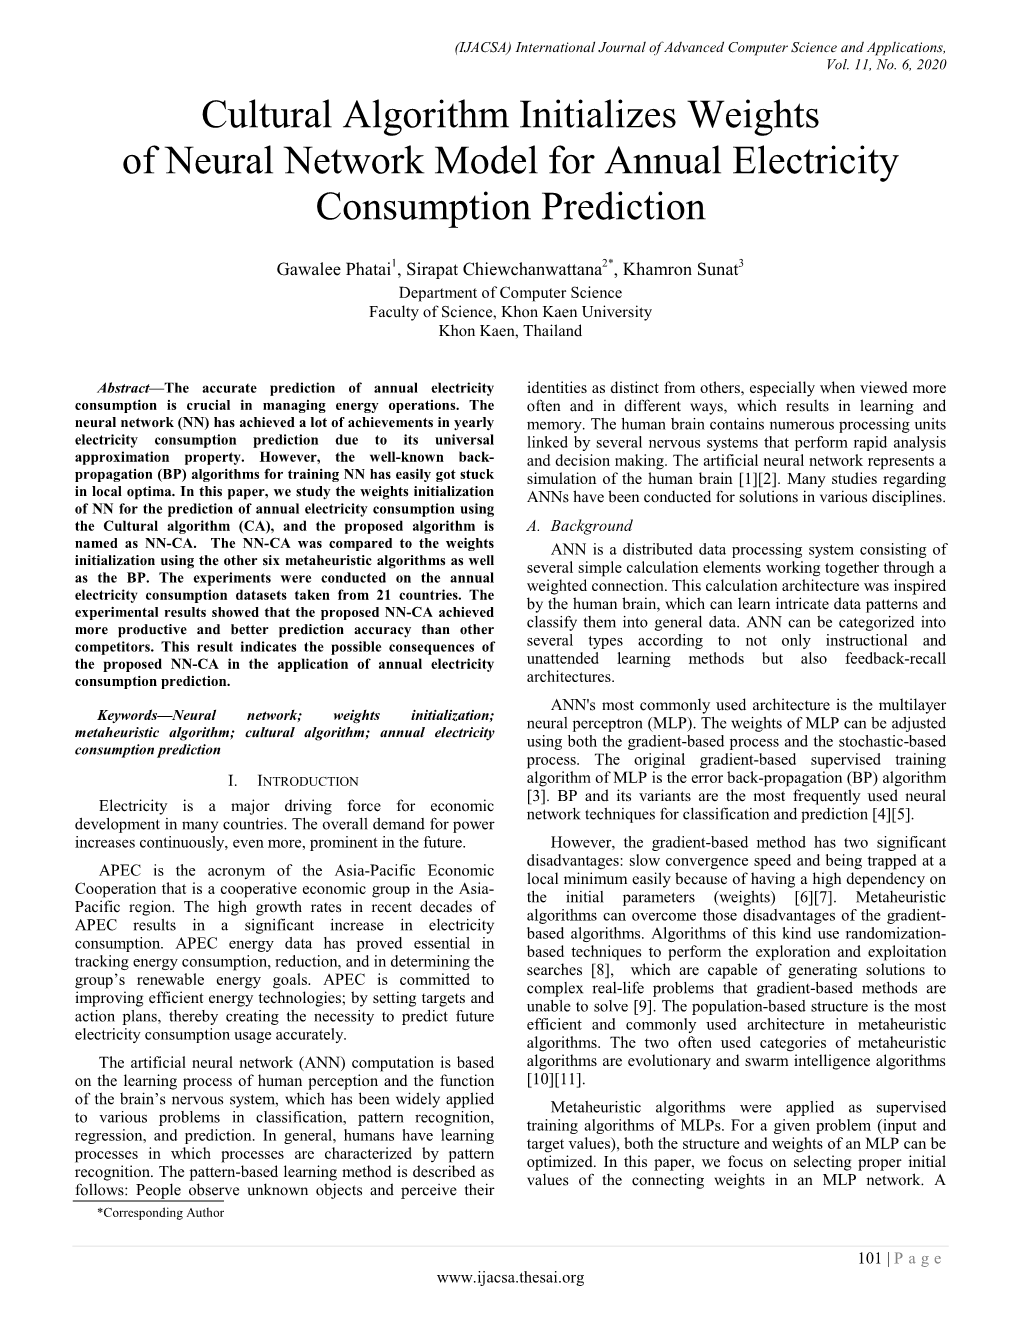 "Cultural Algorithm Initializes Weights of Neural Network Model for Annual Electricity Consumption Prediction "